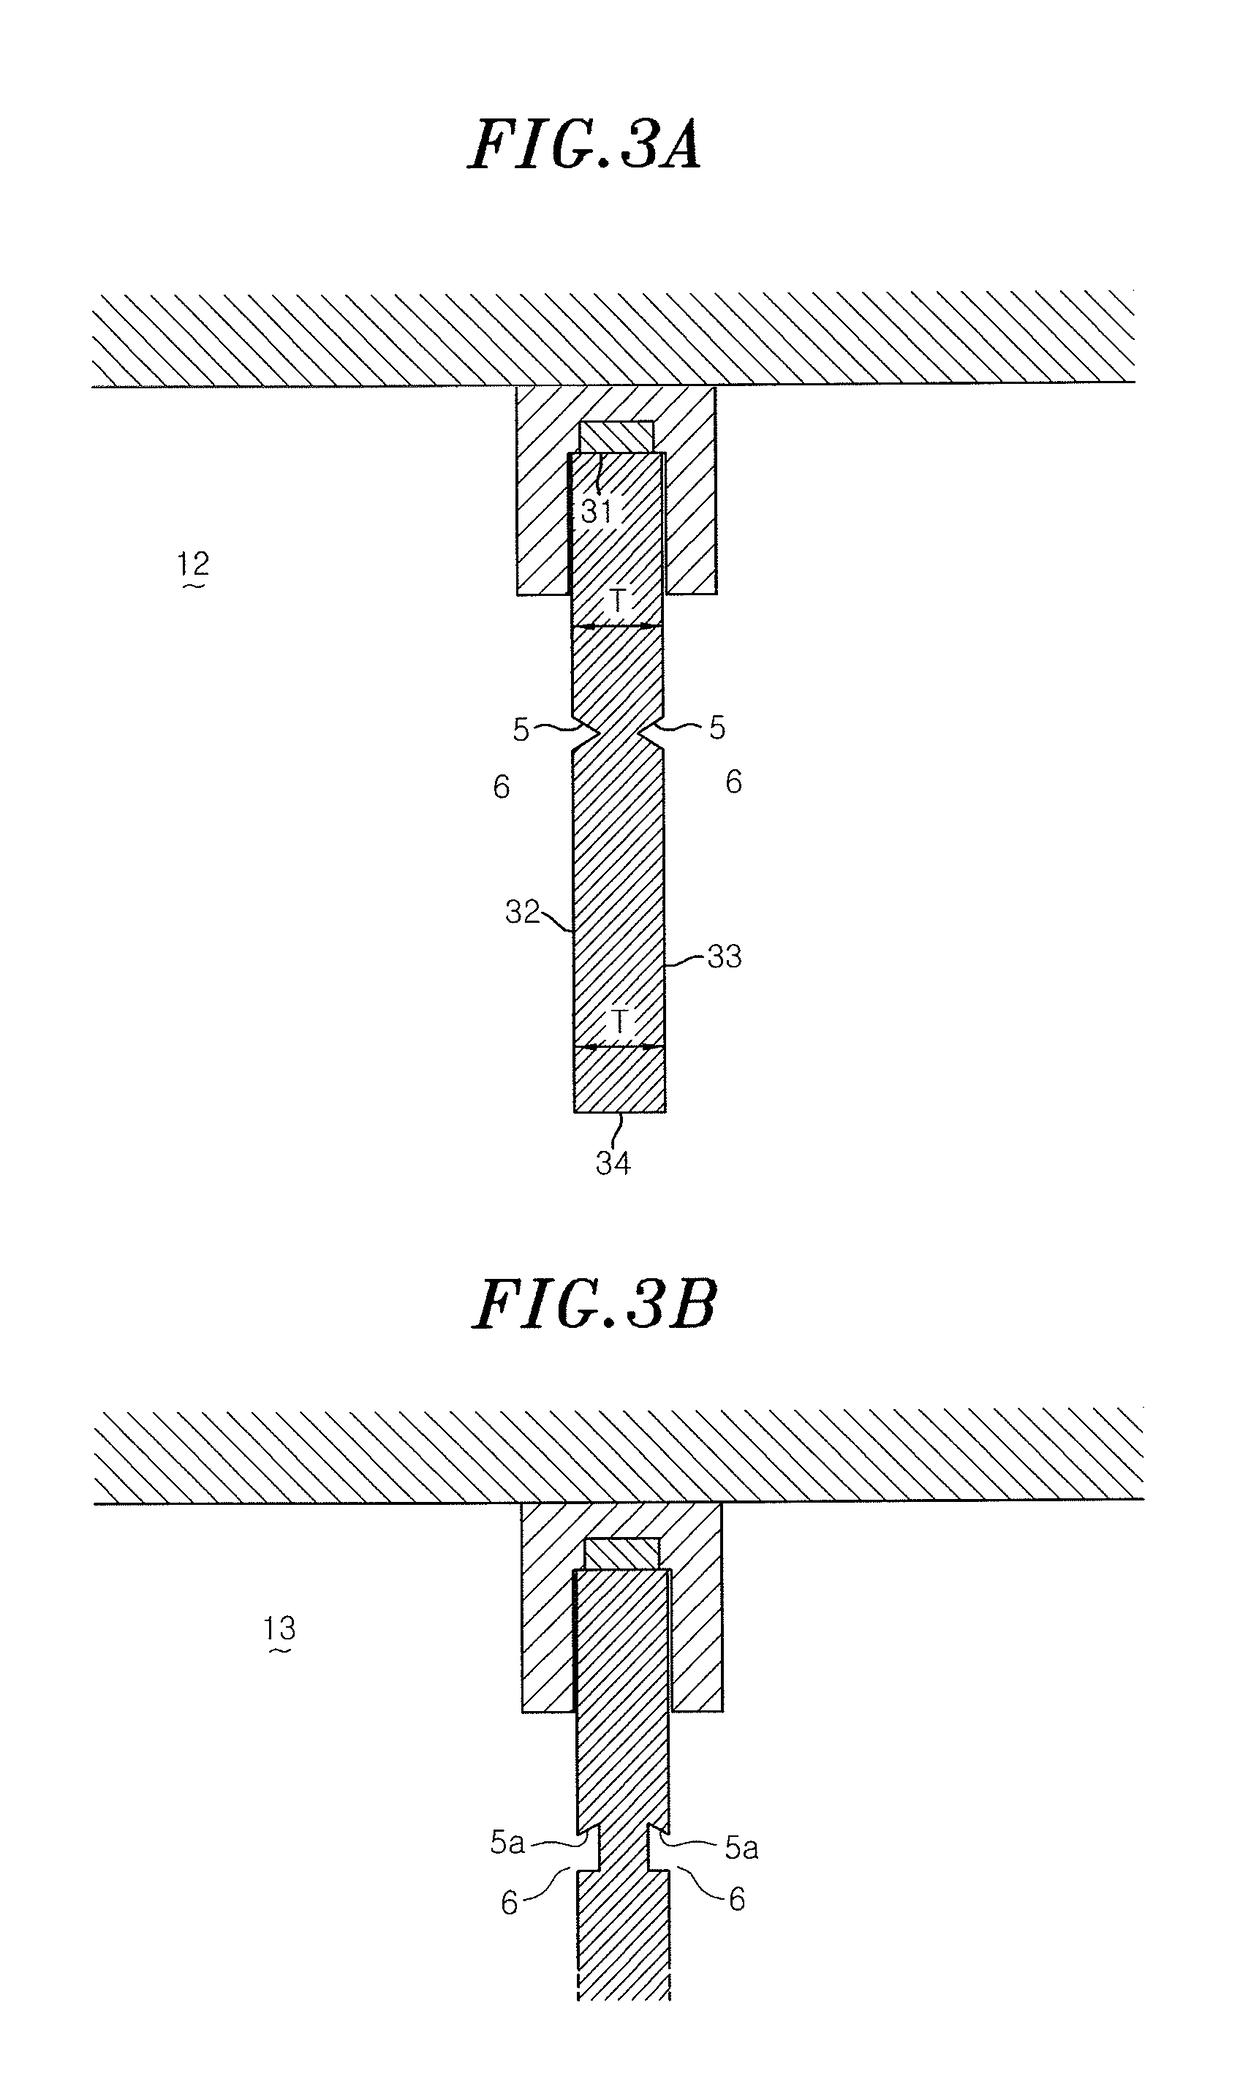 Illumination device with at least one main emission surface having a stepped surface configured to reflect light in multiple directions